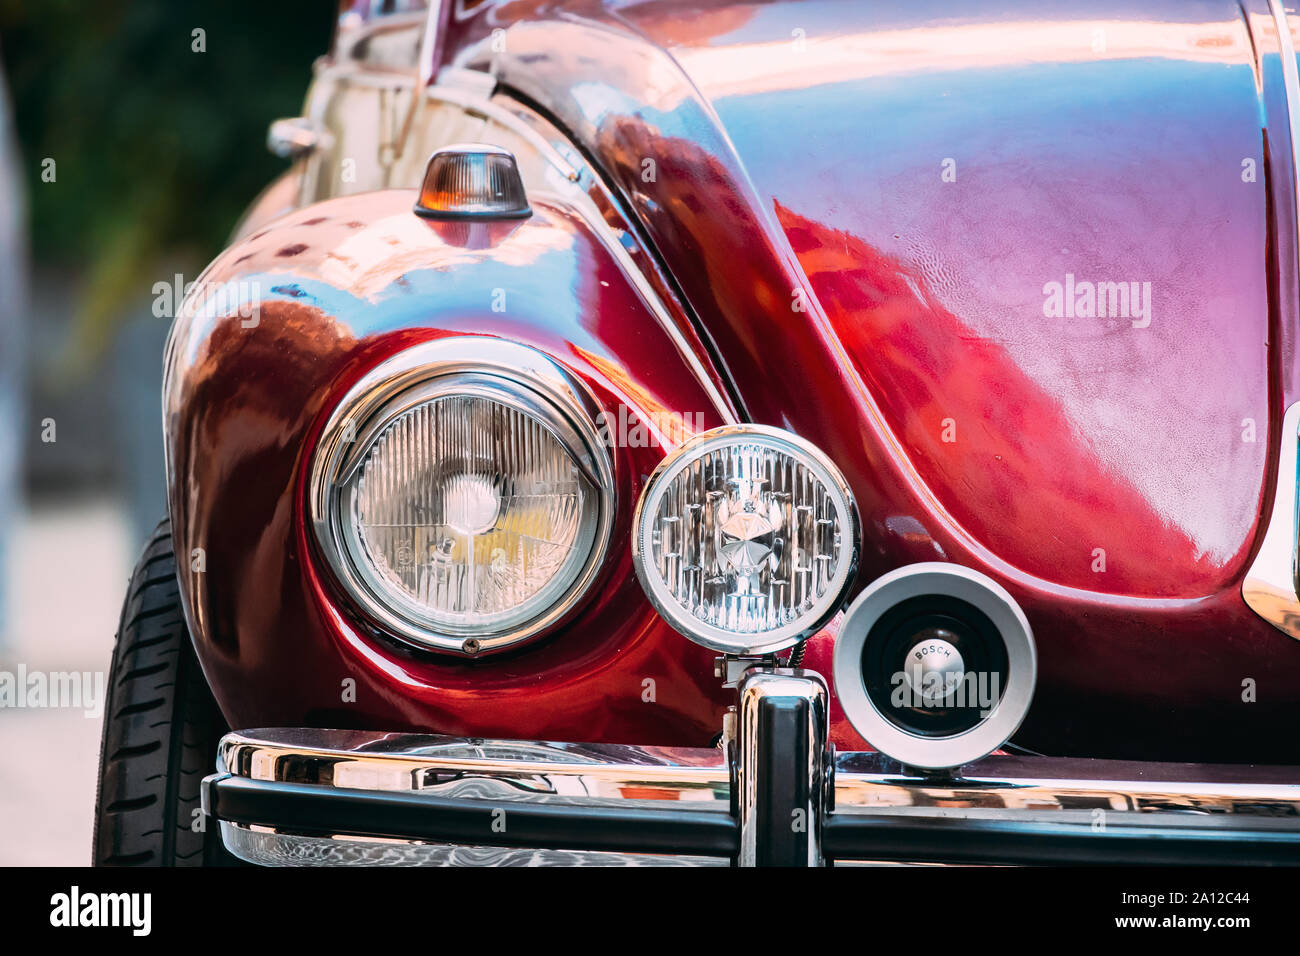 Rome, Italy - October 20, 2018: Close Up Headlight Of Old Retro Vintage Red Color Volkswagen Beetle Car Parked At Street Stock Photo